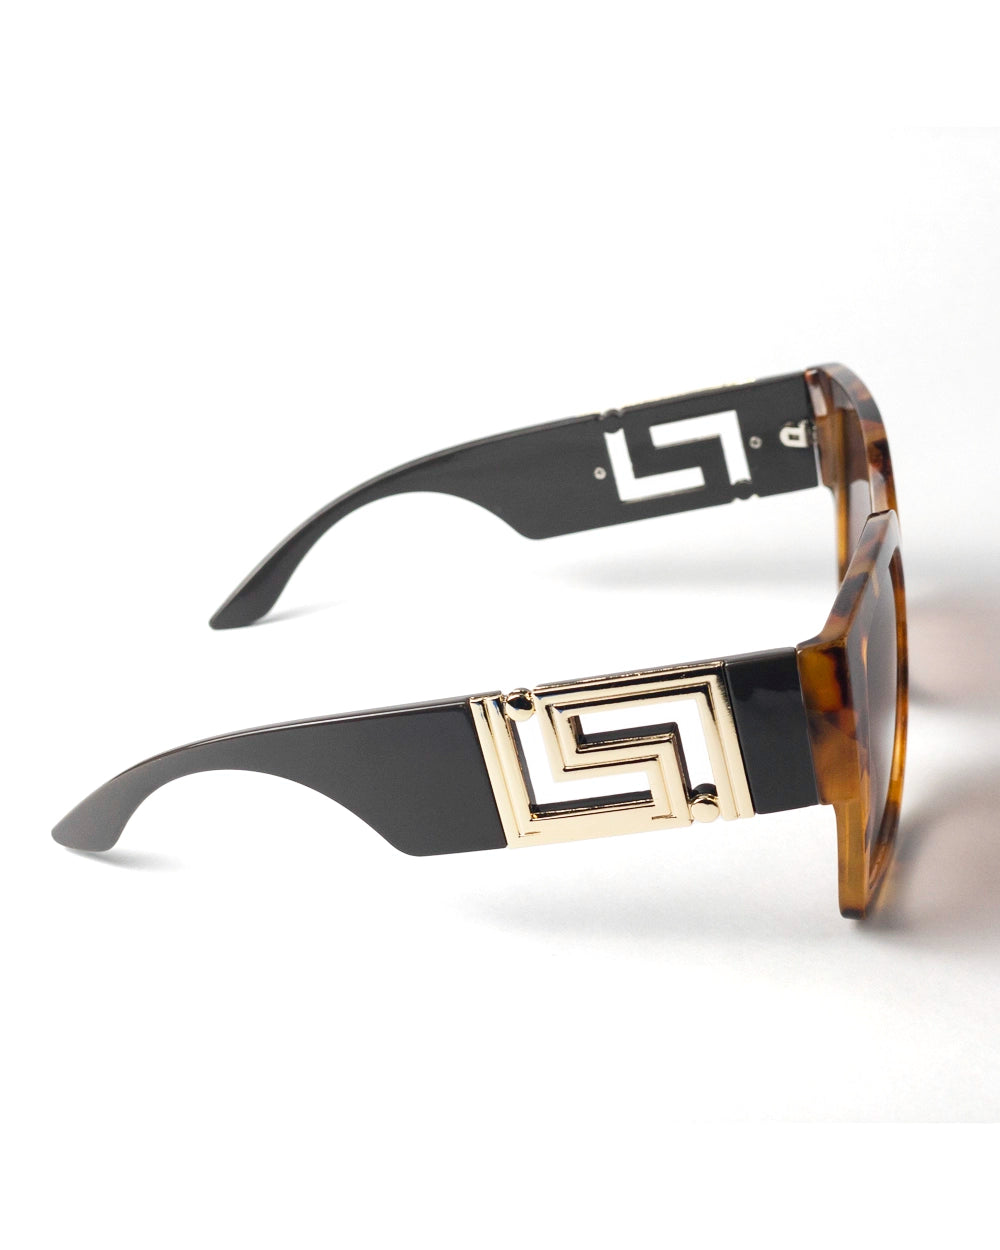 Luxury Mirror Lens Vintage Square Sunglasses: Sun Protection with Style